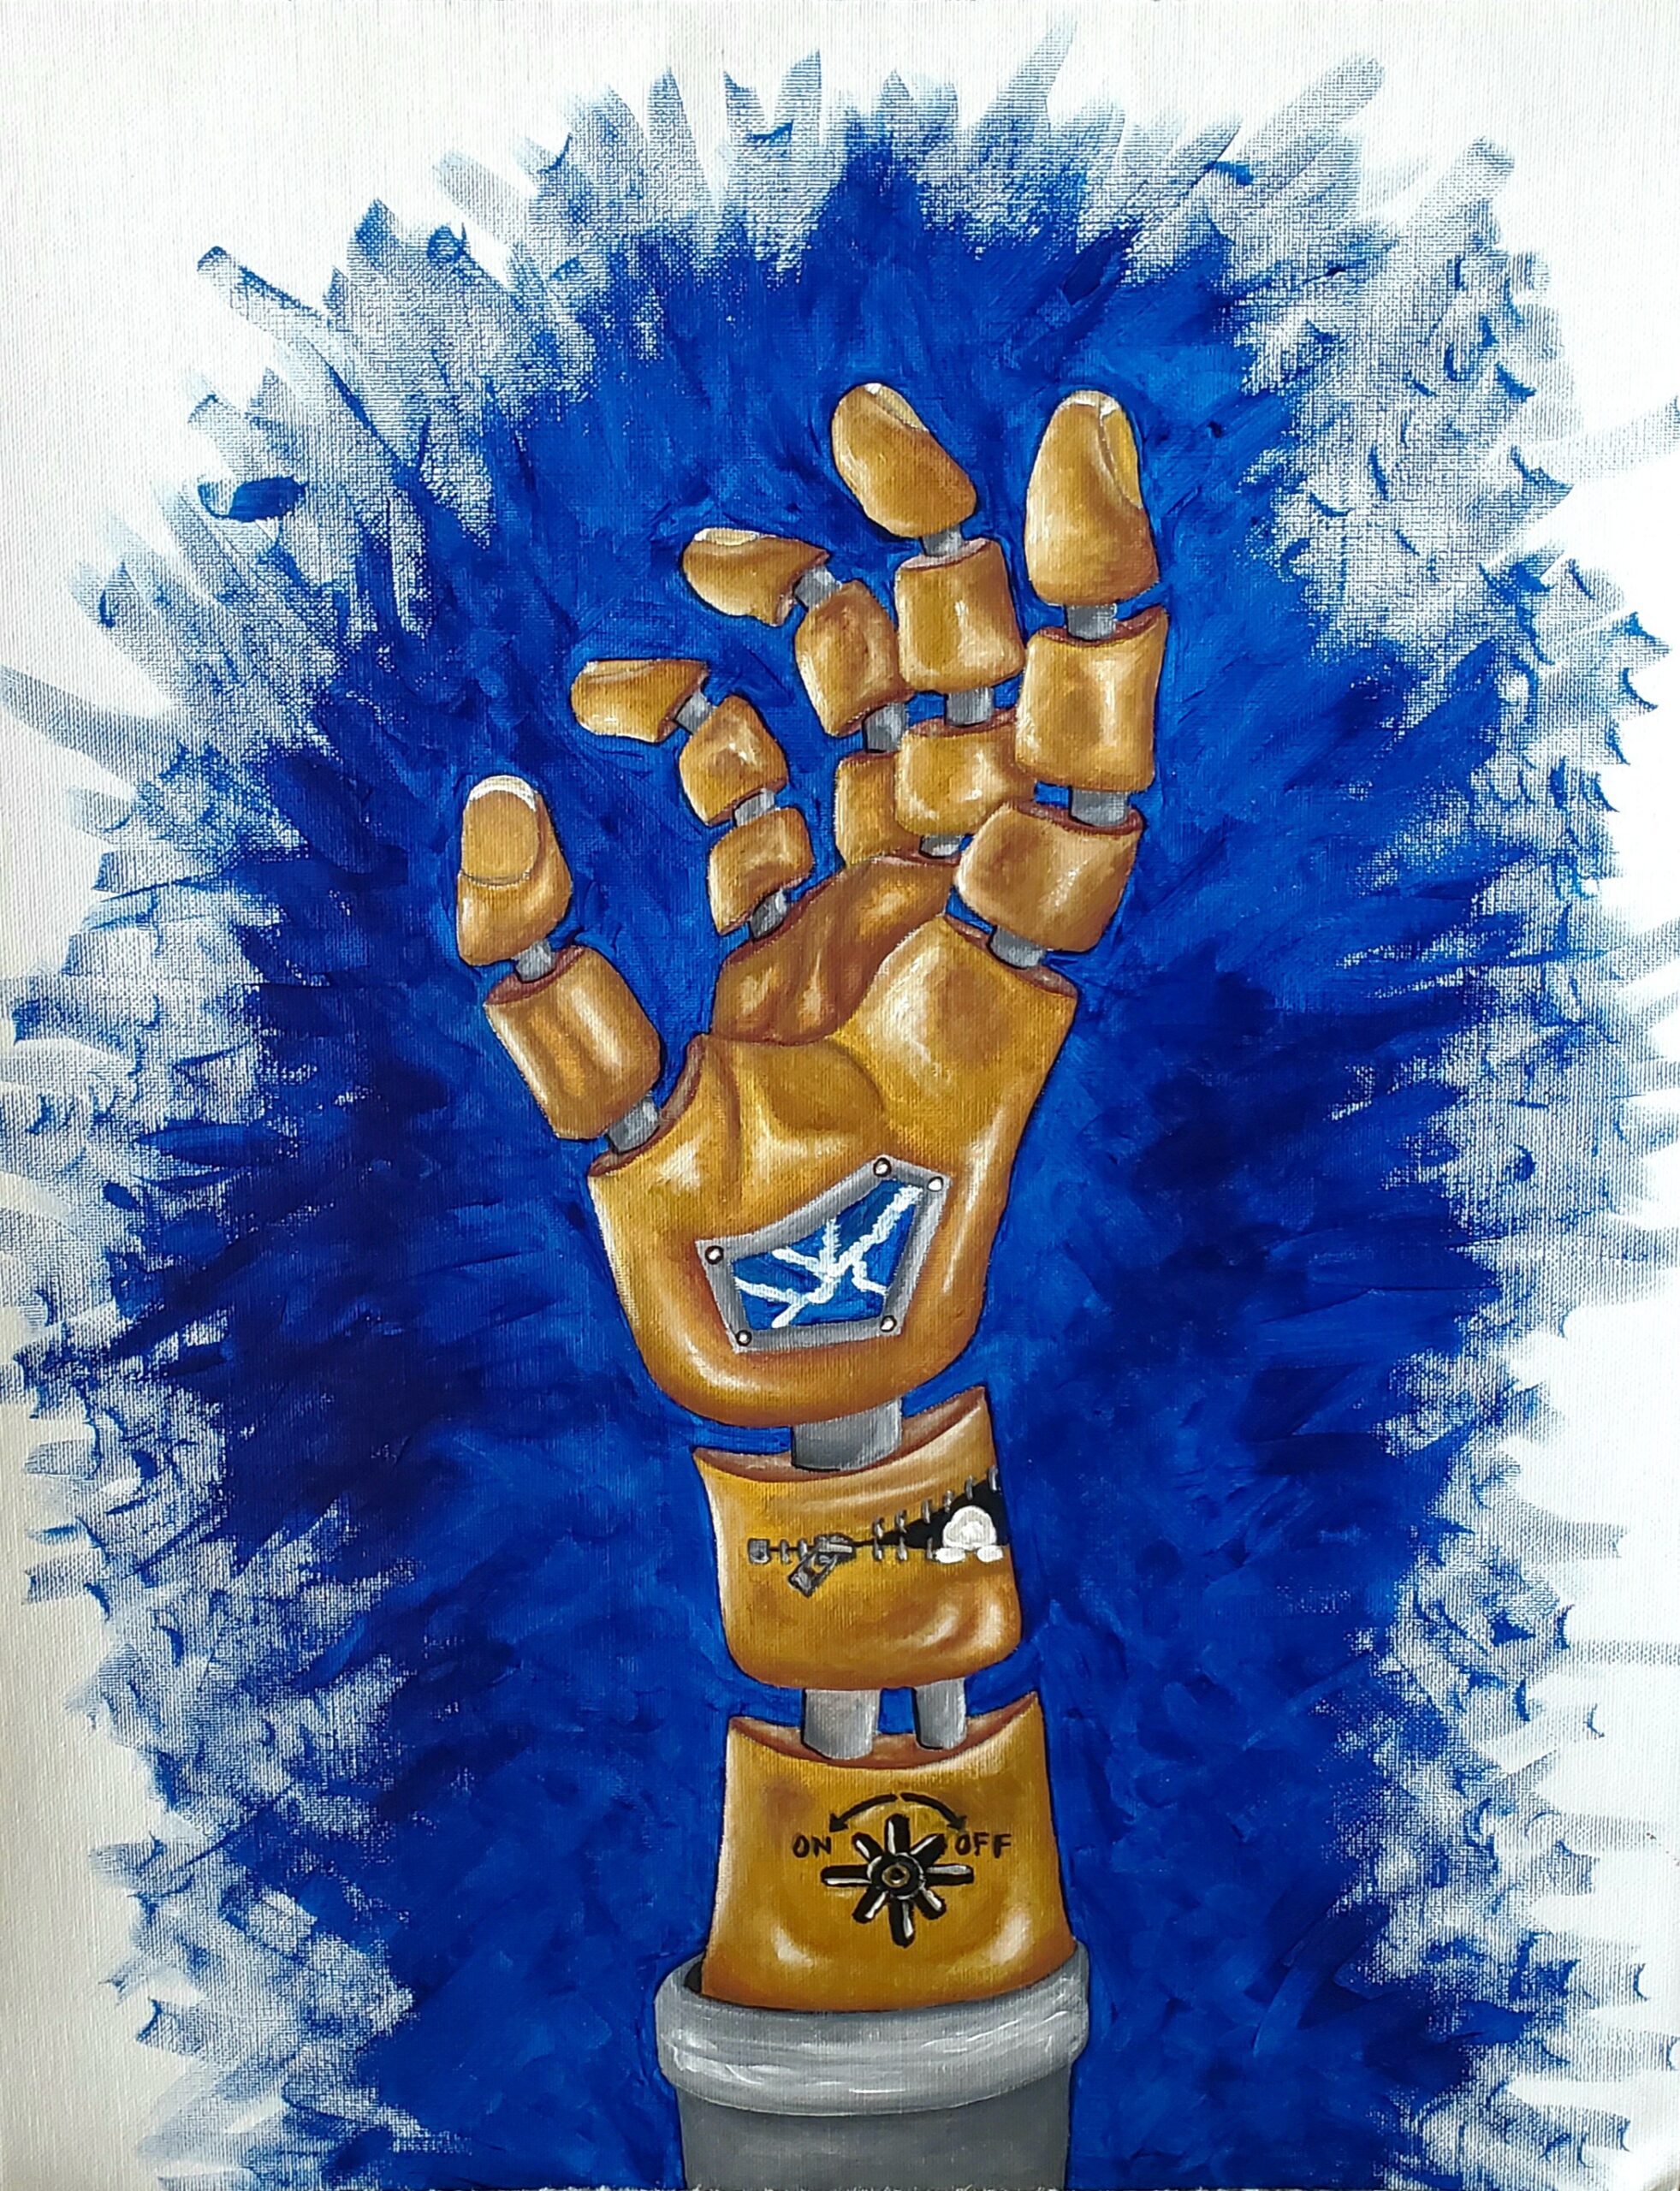 A gold robotic hand outreaching upward with a burst of an ocean blue background